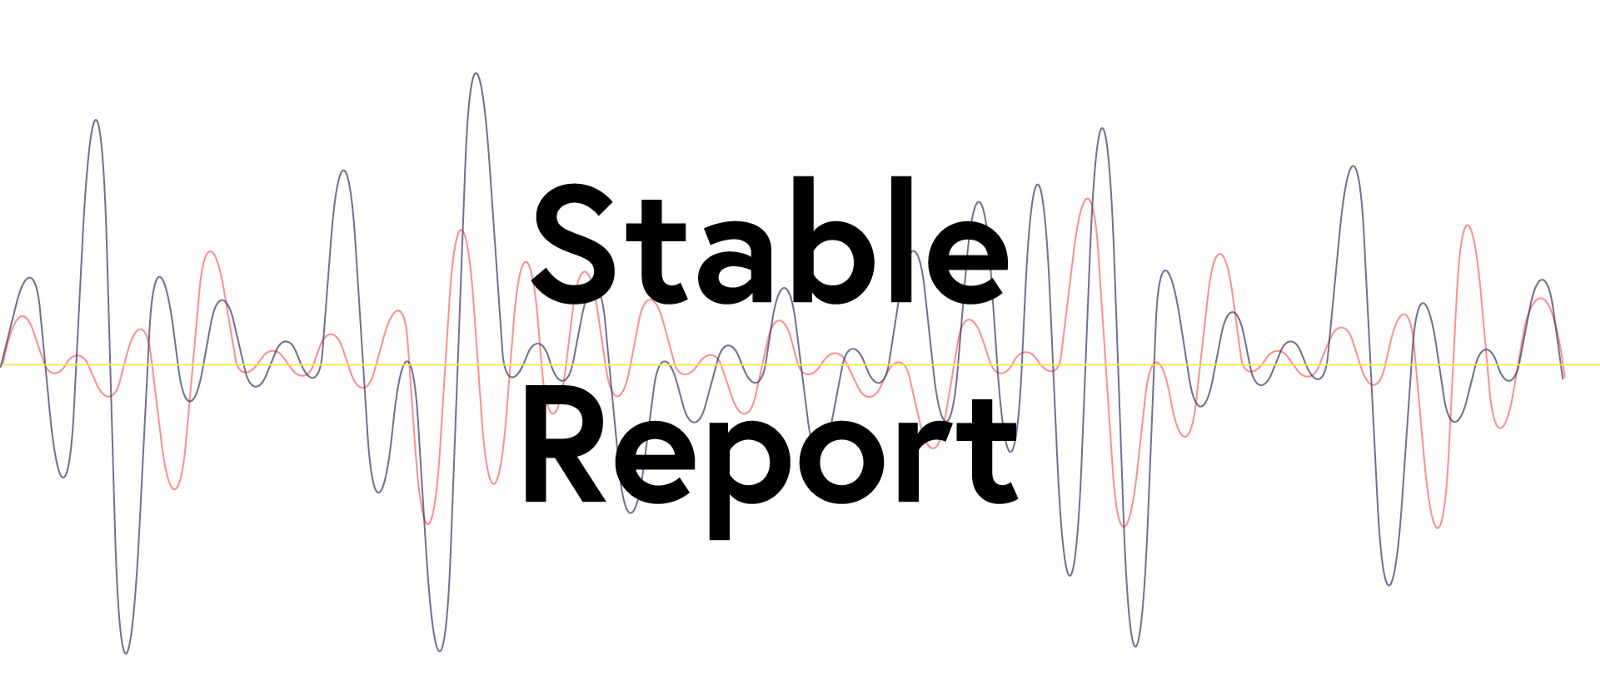 Stablecoin report: a comparative analysis of major crypto projects